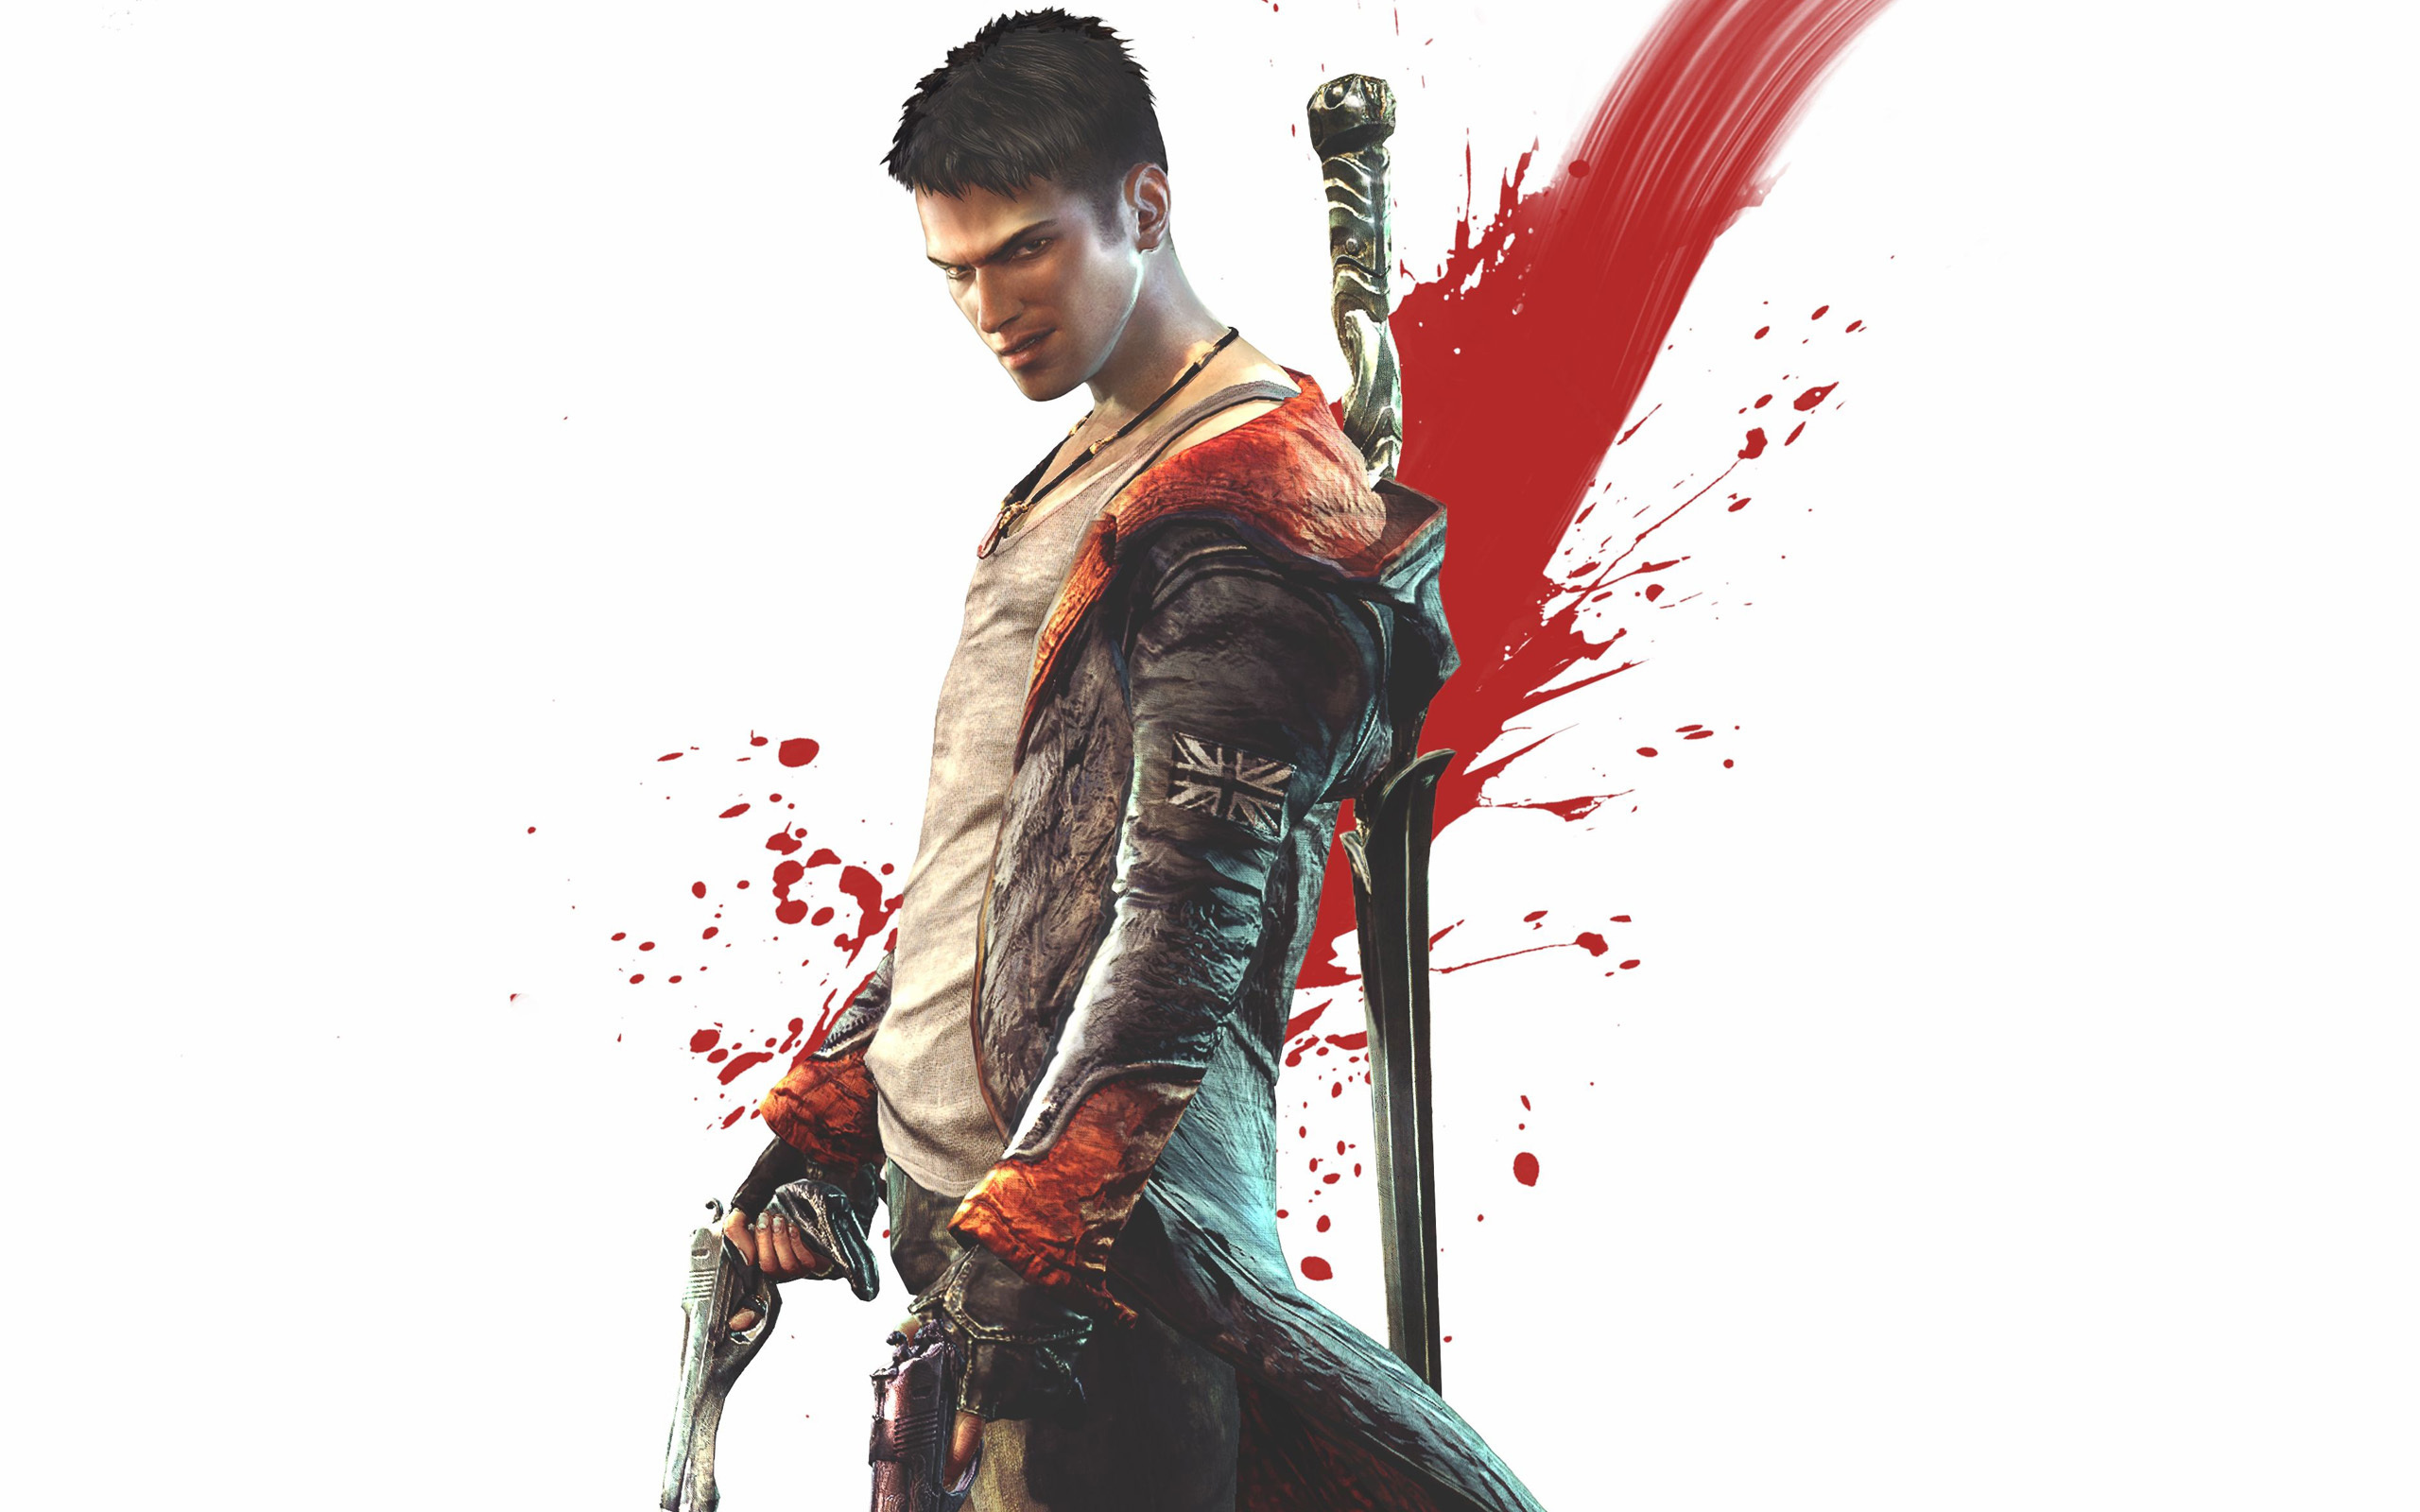 dmc: devil may cry, devil may cry, video game